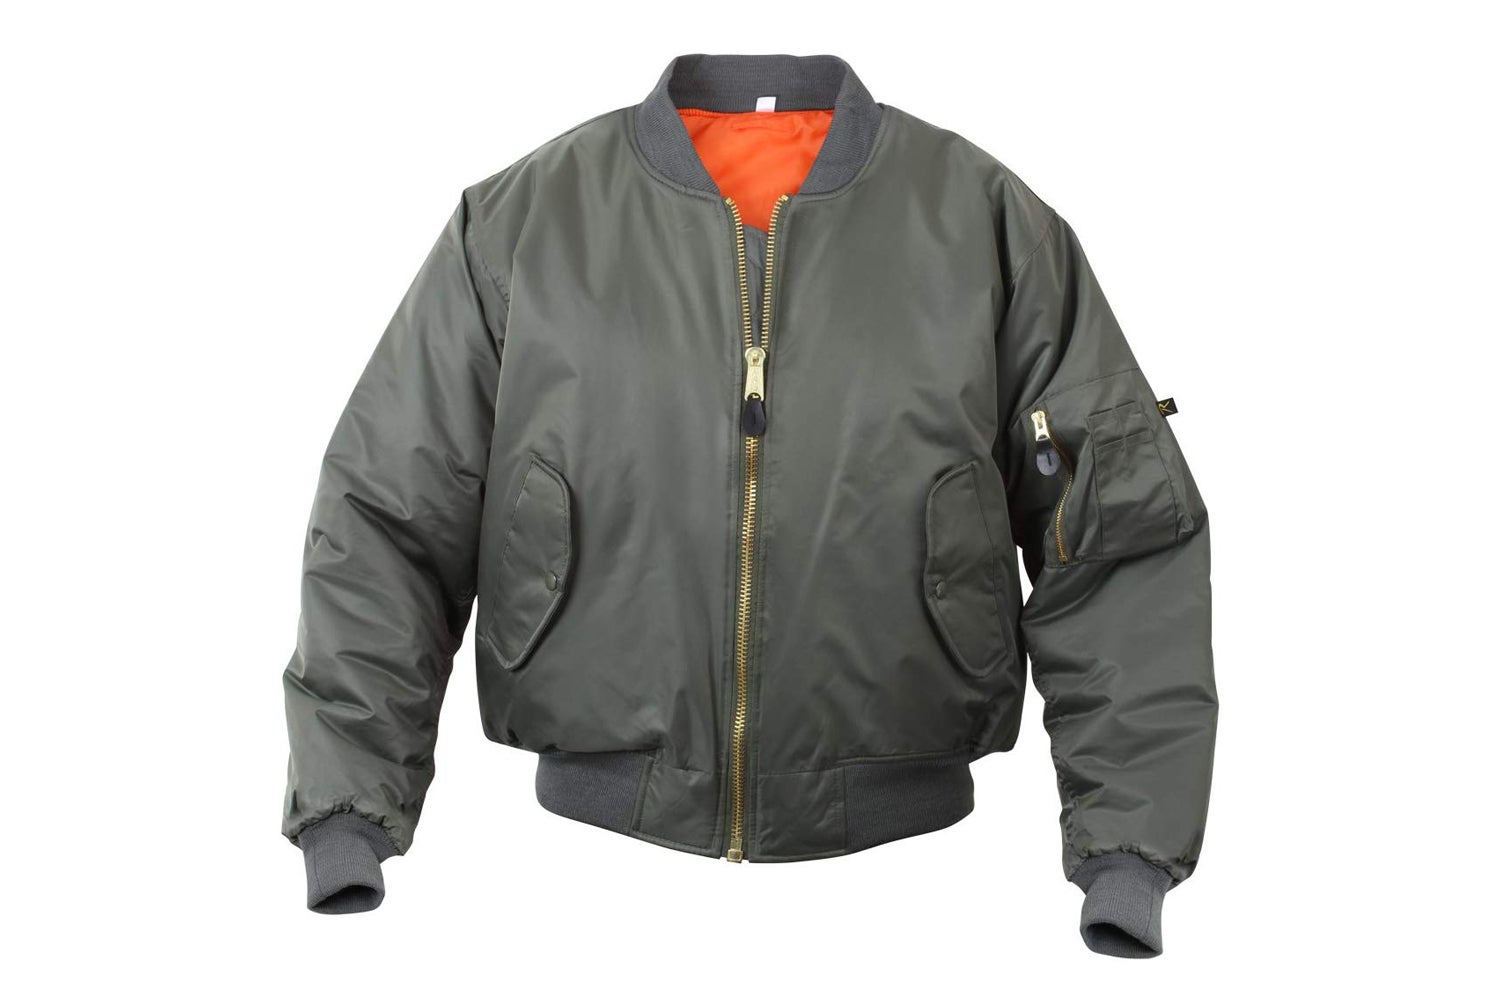 What to Look For in a Flight Jacket